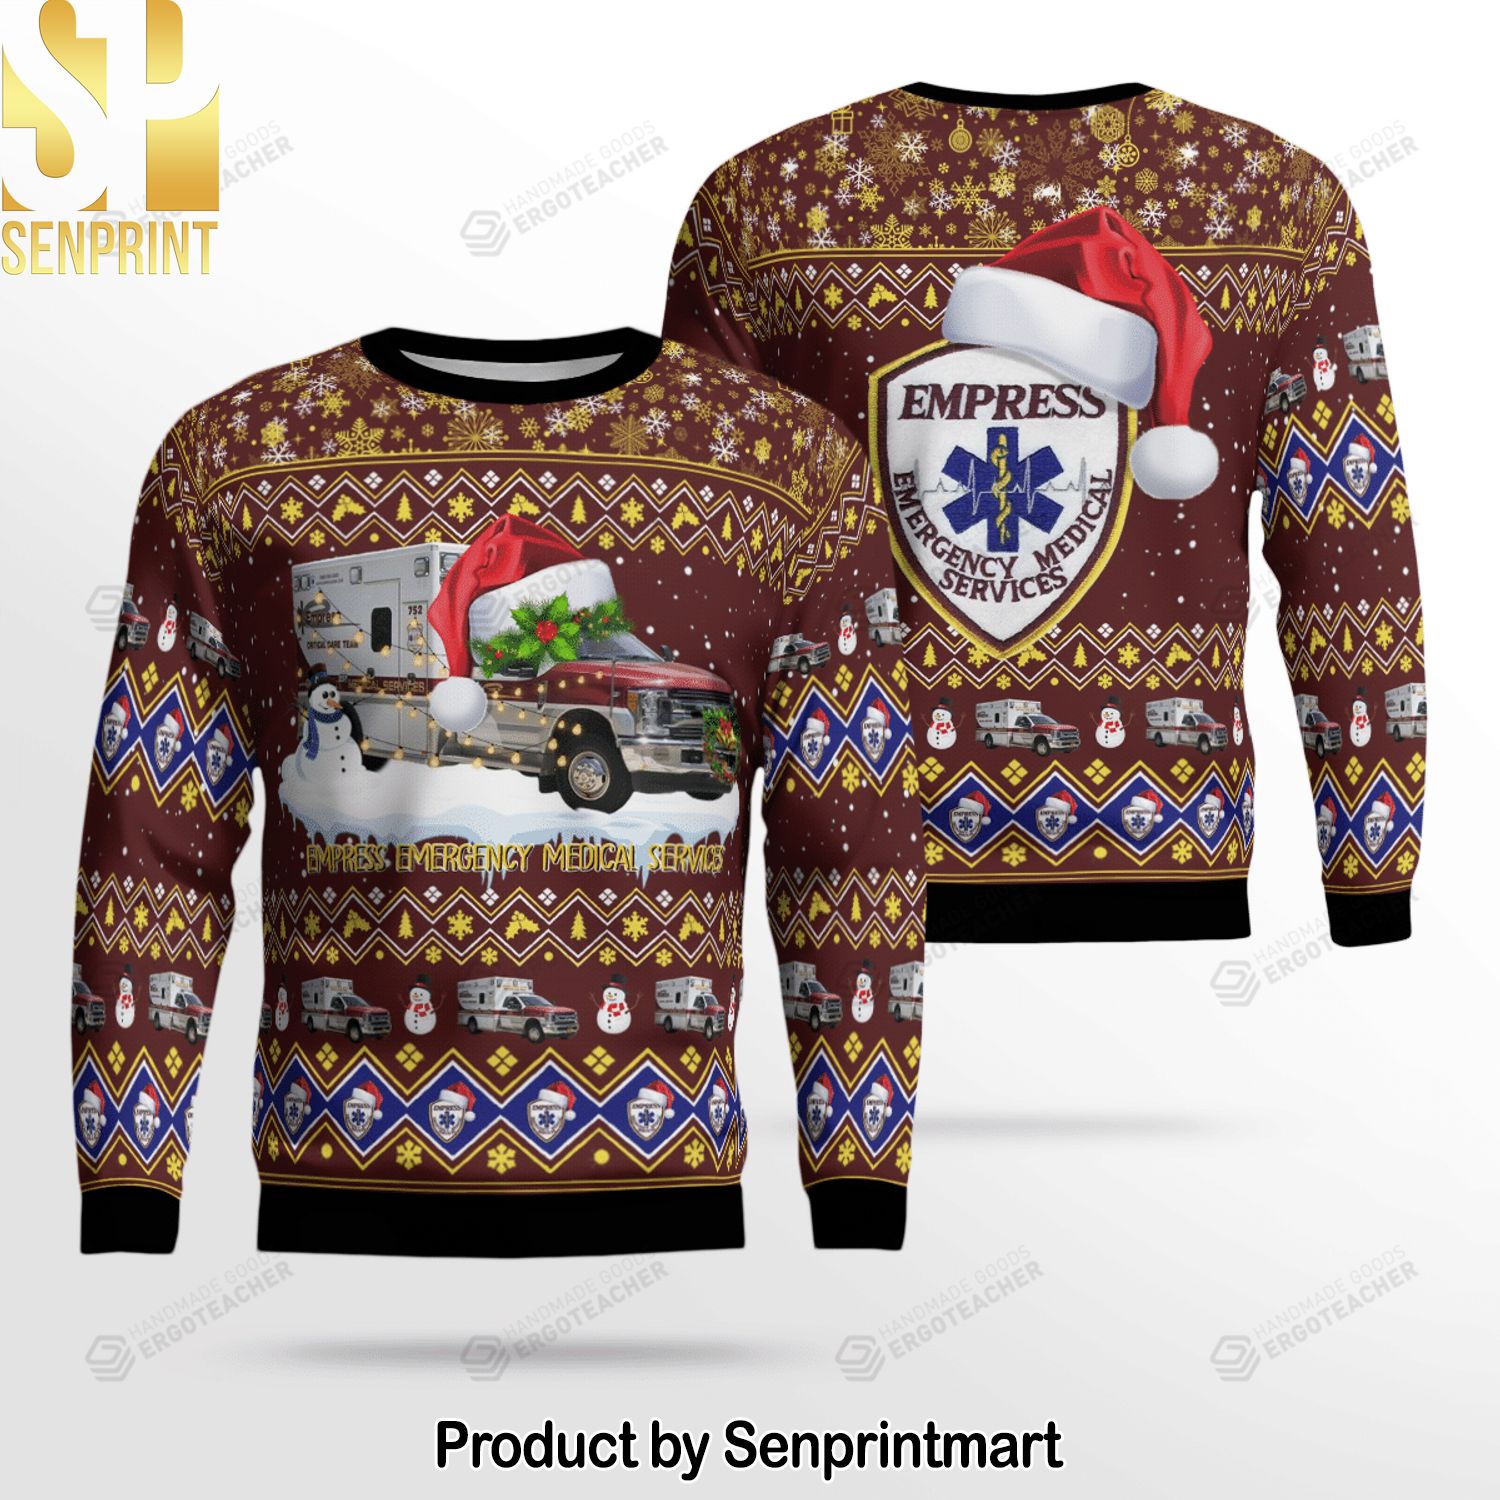 Empress Emergency Medical Services Knitting Pattern Ugly Christmas Sweater